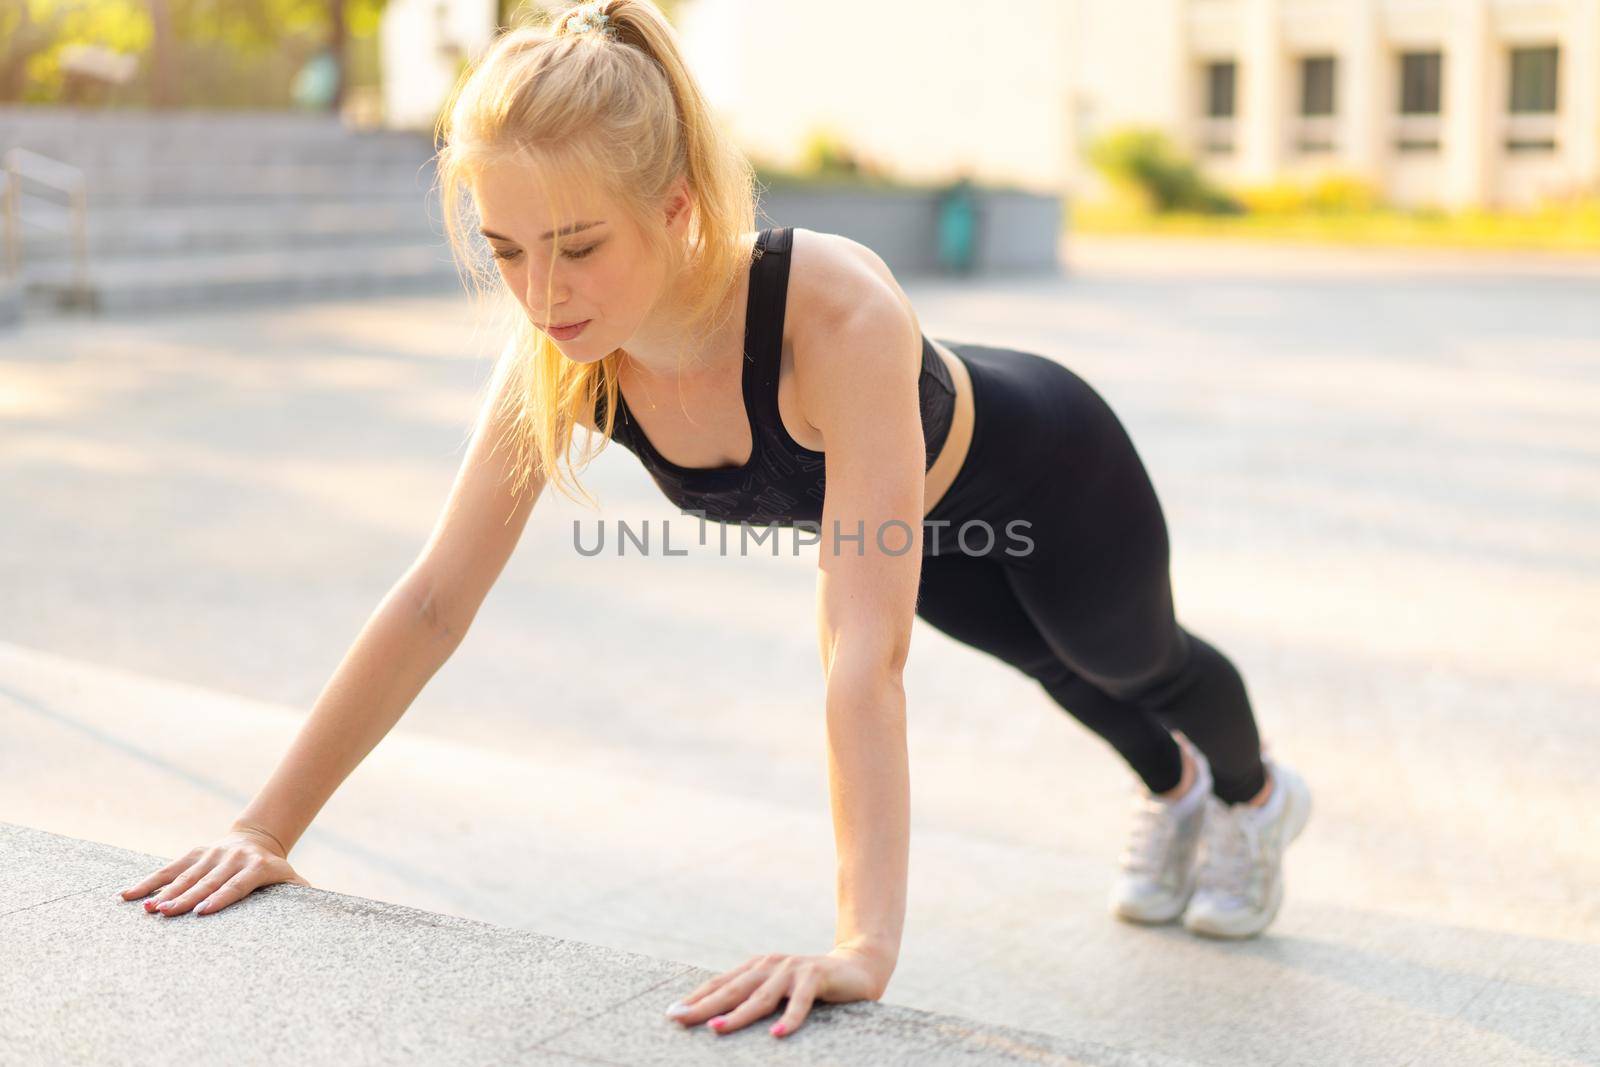 Sport and Fitness Fit Young Adult Woman Doing Plank Exercise Outdoor Urban Environment. Sunlight Summer Park Caucasian Ahlrtic Female Morning Workout Training Exercises Endurance Abs Muscle